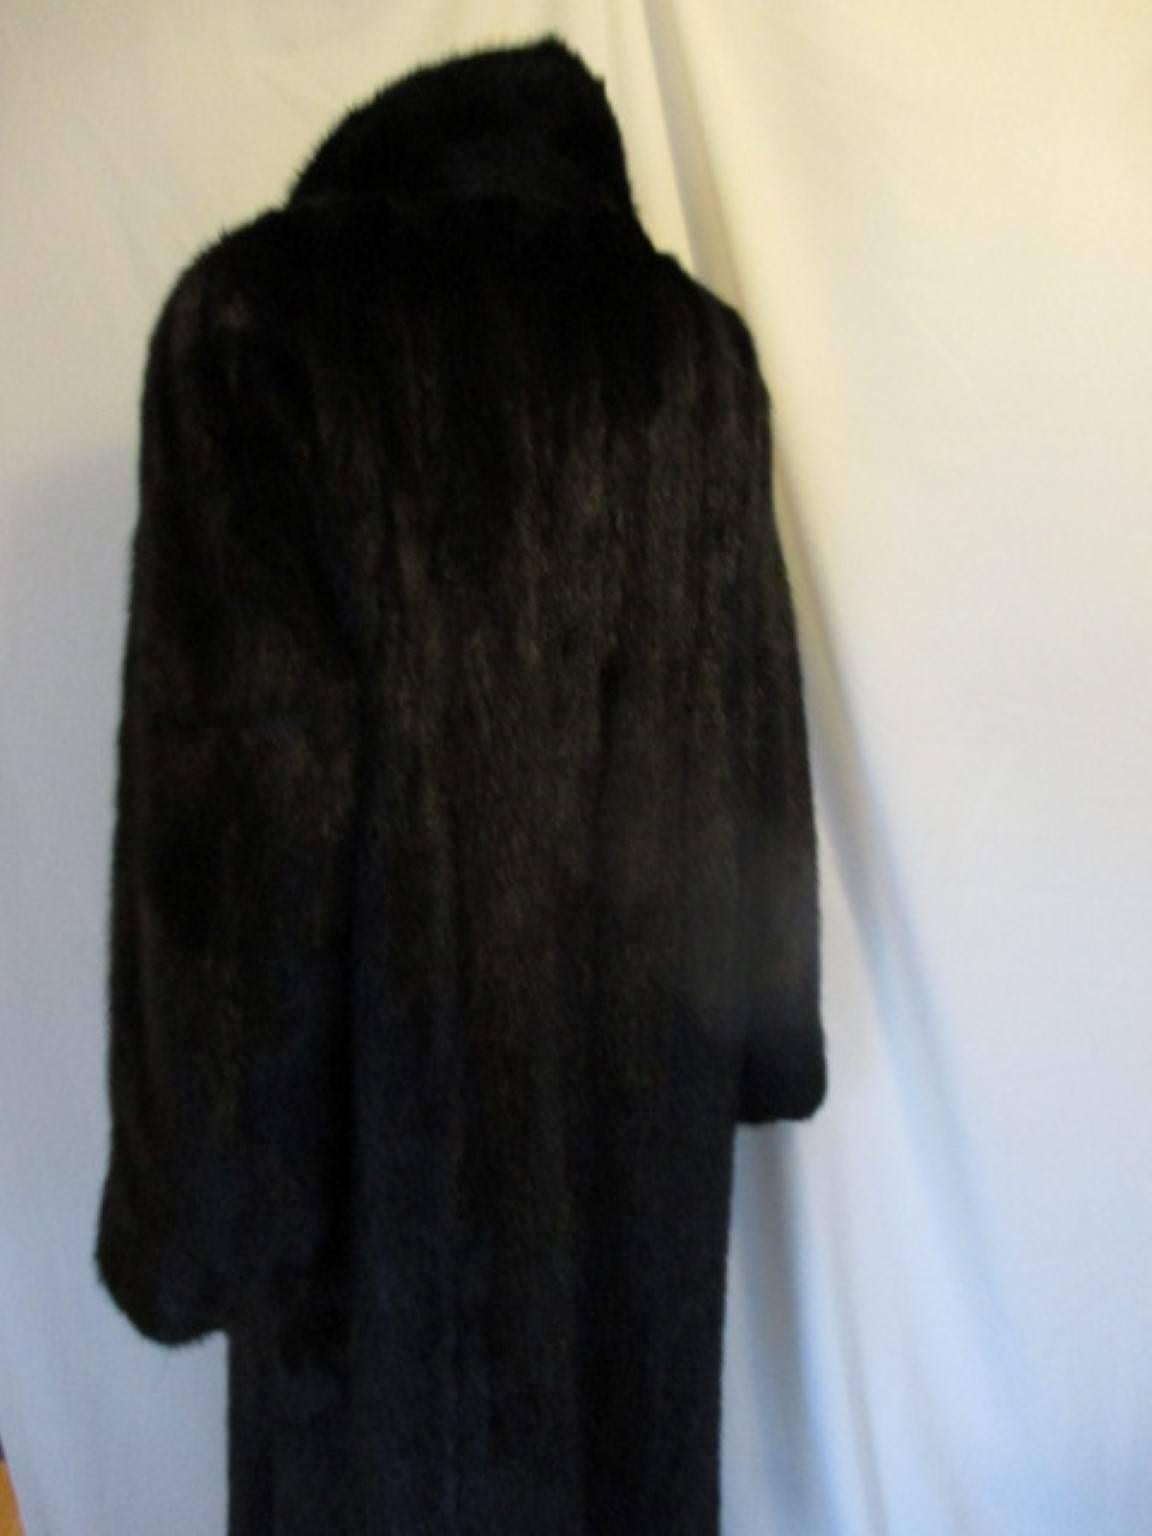 This full length black mink fur is in very good condition and has 2 velvetpockets, an inside pocket and 3 closing hooks.

The size fits like a medium , EU 42